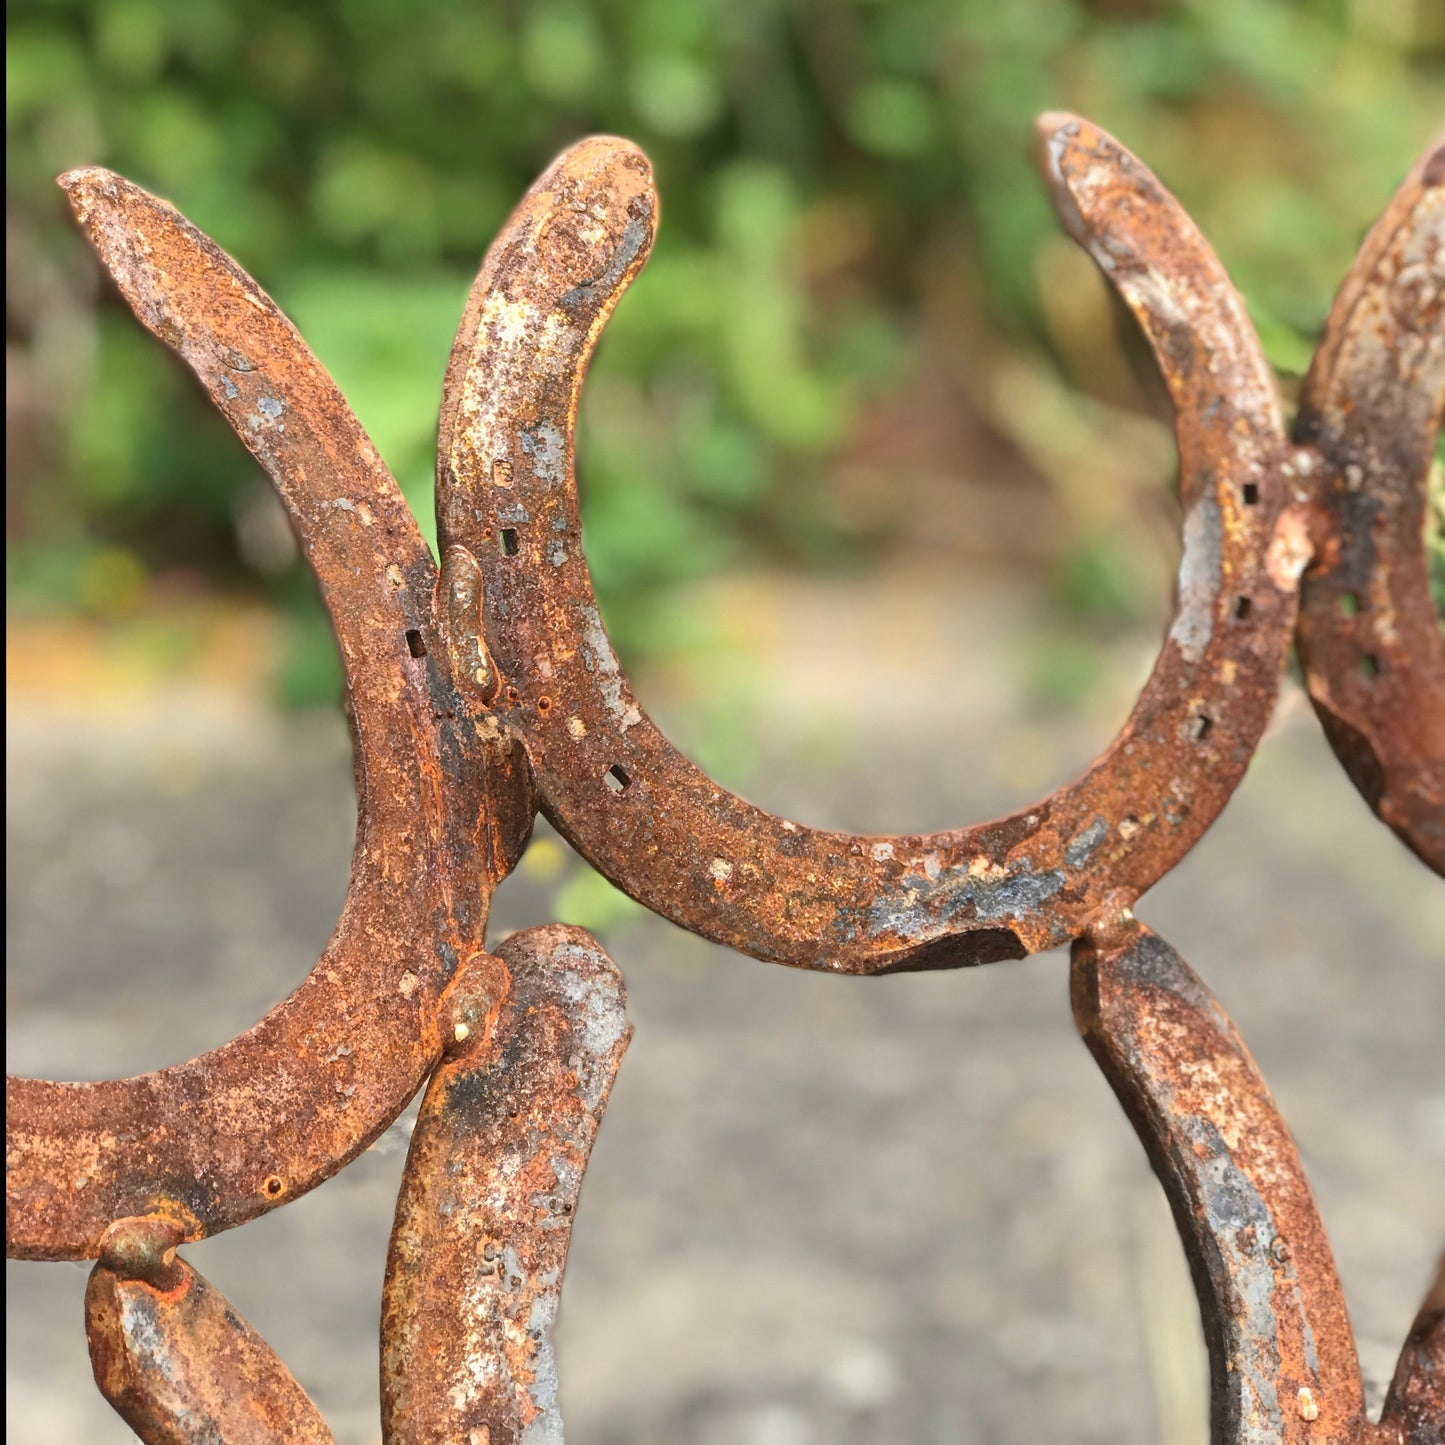 A closeup of horseshoes forming a handmade fire pit. The horseshoes have an authentic rust finish.